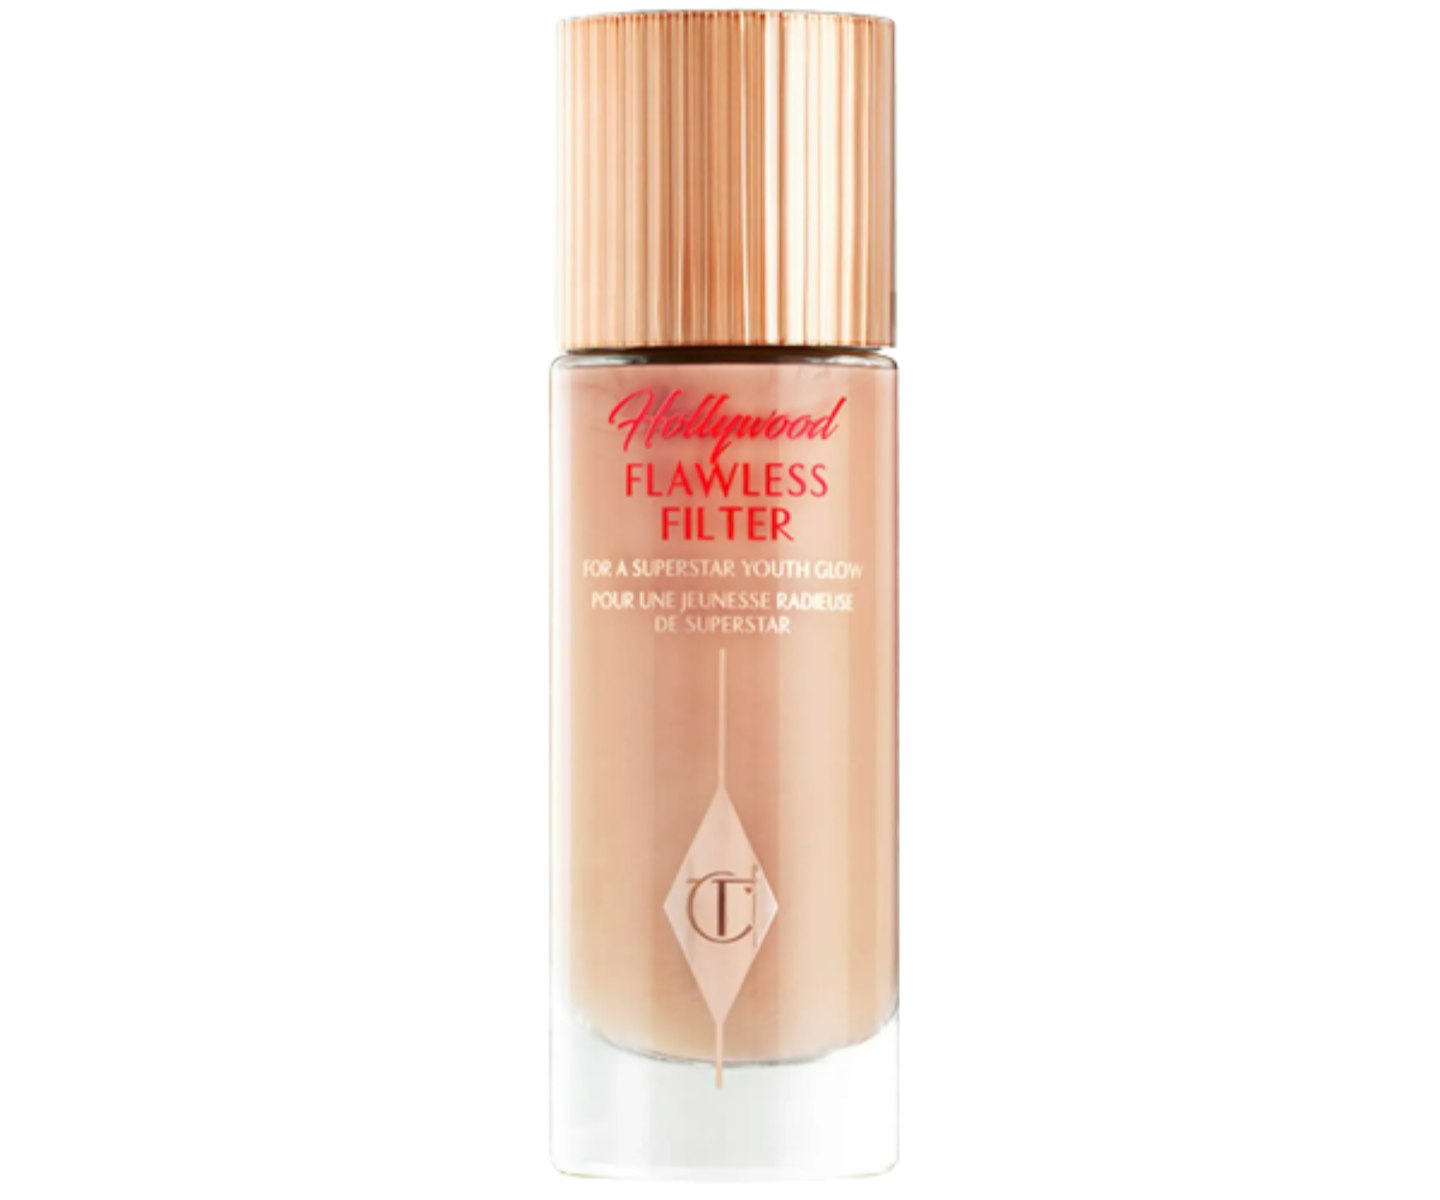 A picture of the Charlotte Tilbury Hollywood Flawless Filter